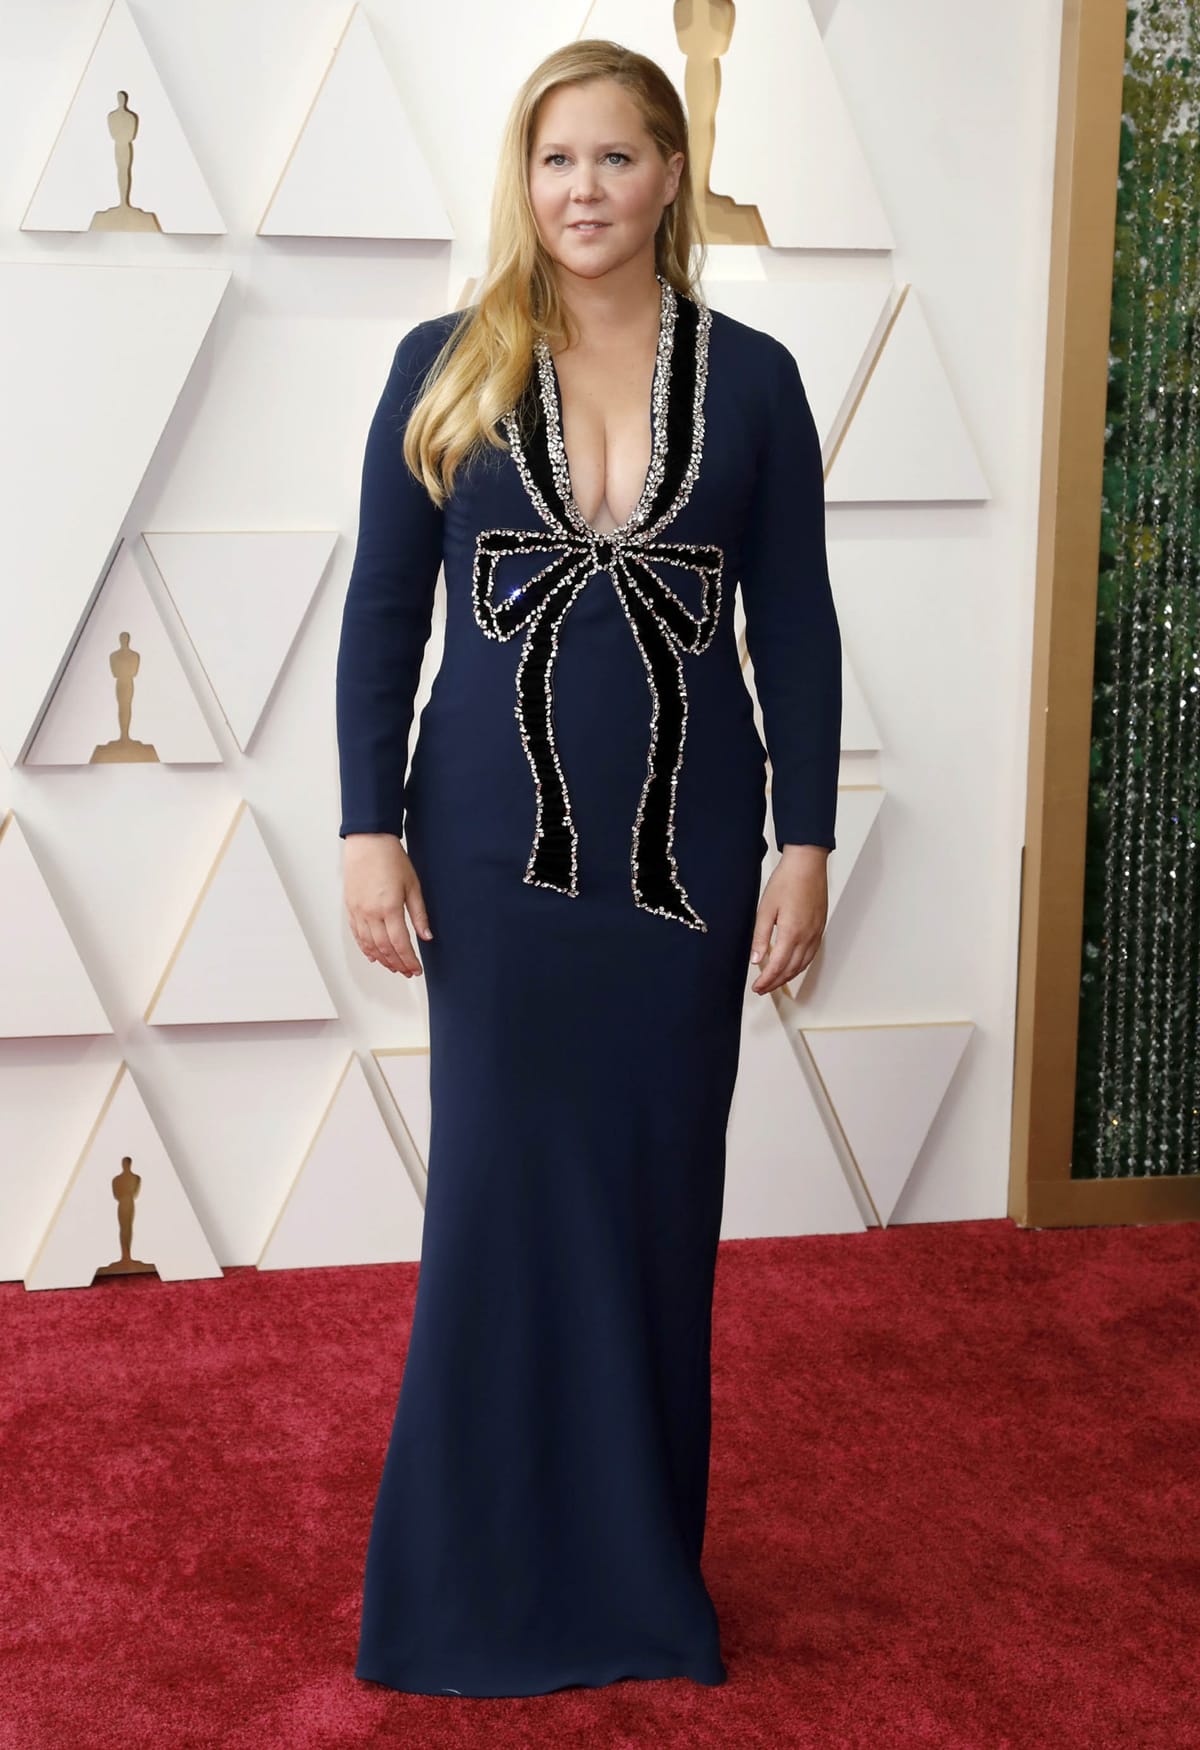 Amy Schumer in a bow-embellished Oscar de la Renta dress at the 94th Annual Academy Awards